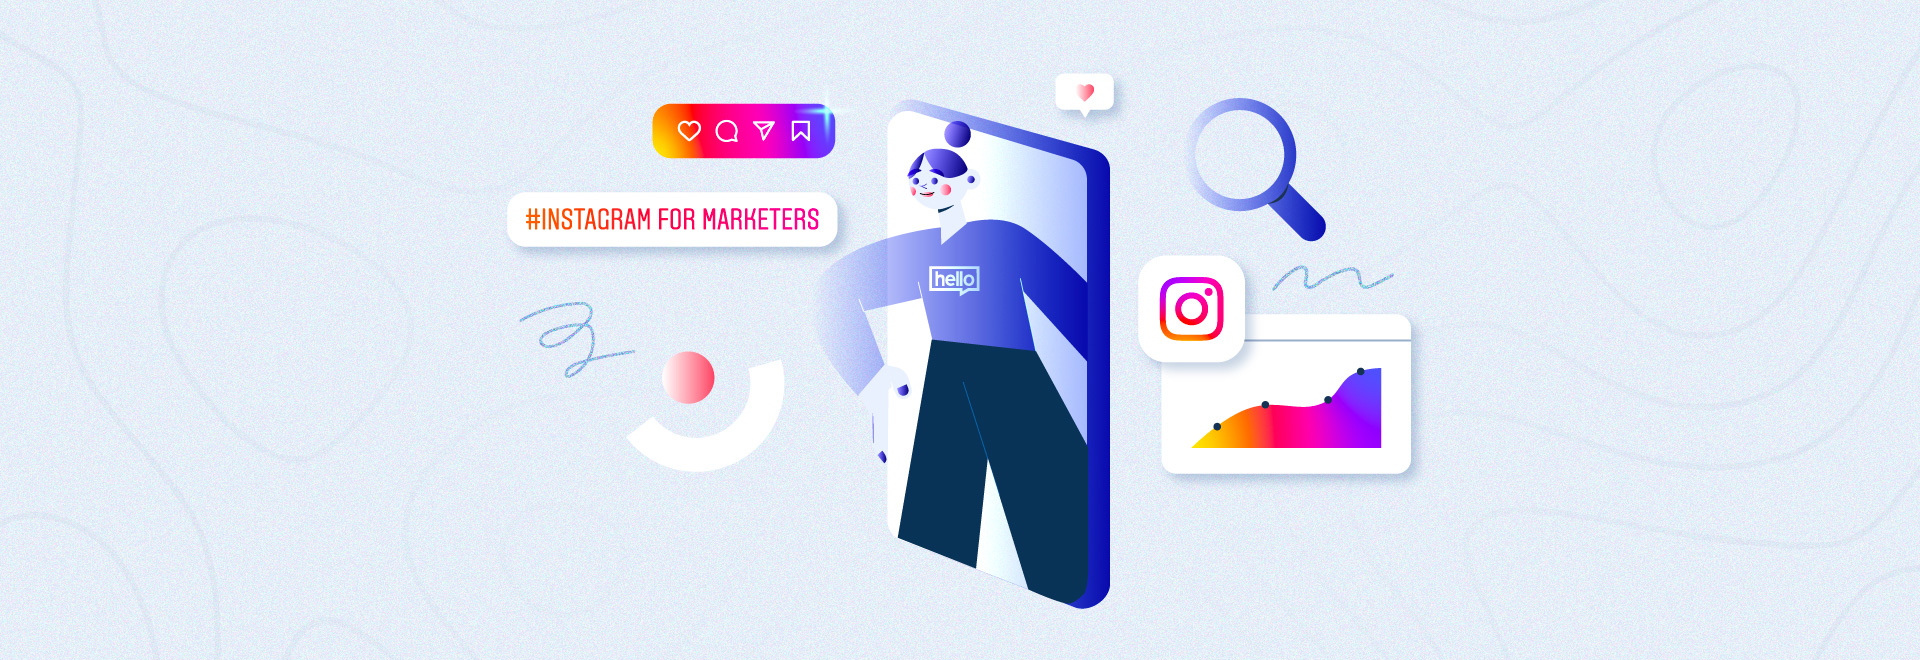 The basics of Instagram for marketers